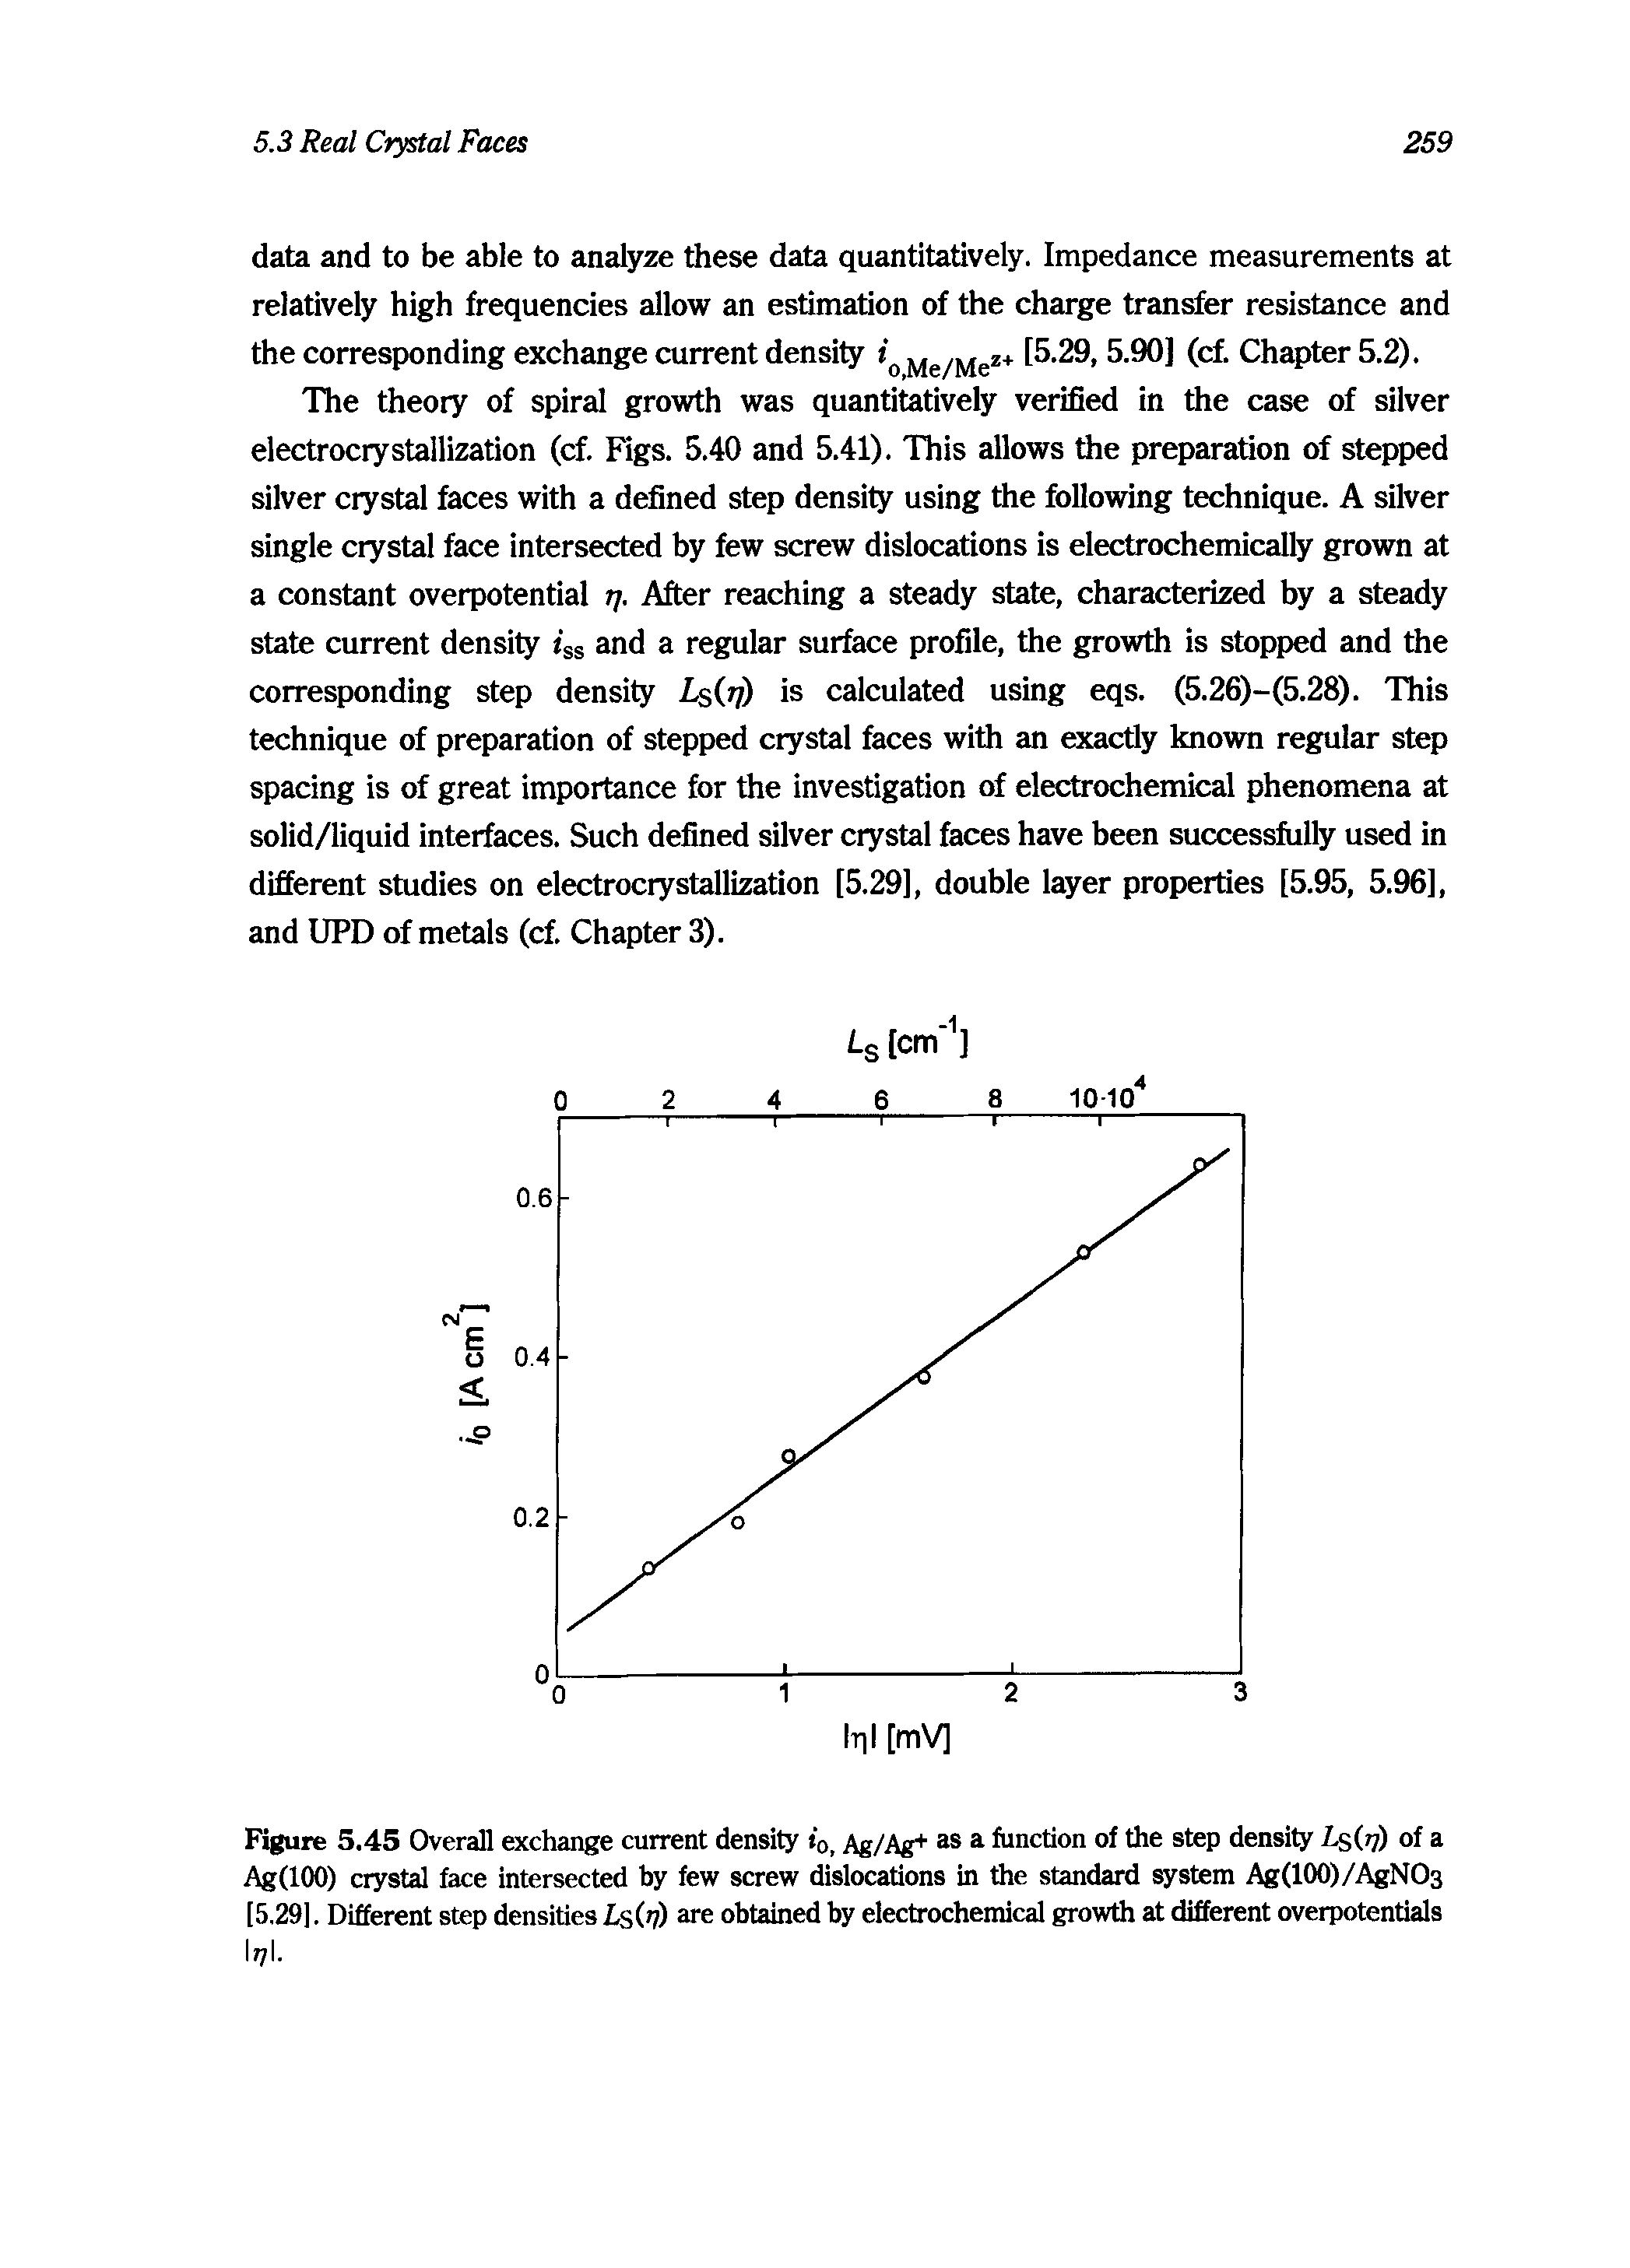 Figure 5.45 Overall exchange current density o, Ag/Ag+ as a function of the step density Ls(rj) of a Ag(lOO) crystal face intersected by few screw dislocations in the standard system Ag(100)/AgNO3 [5.29]. Different step densities Ls,(rj) are obtained by electrochemical growth at different overpotentials I77I.